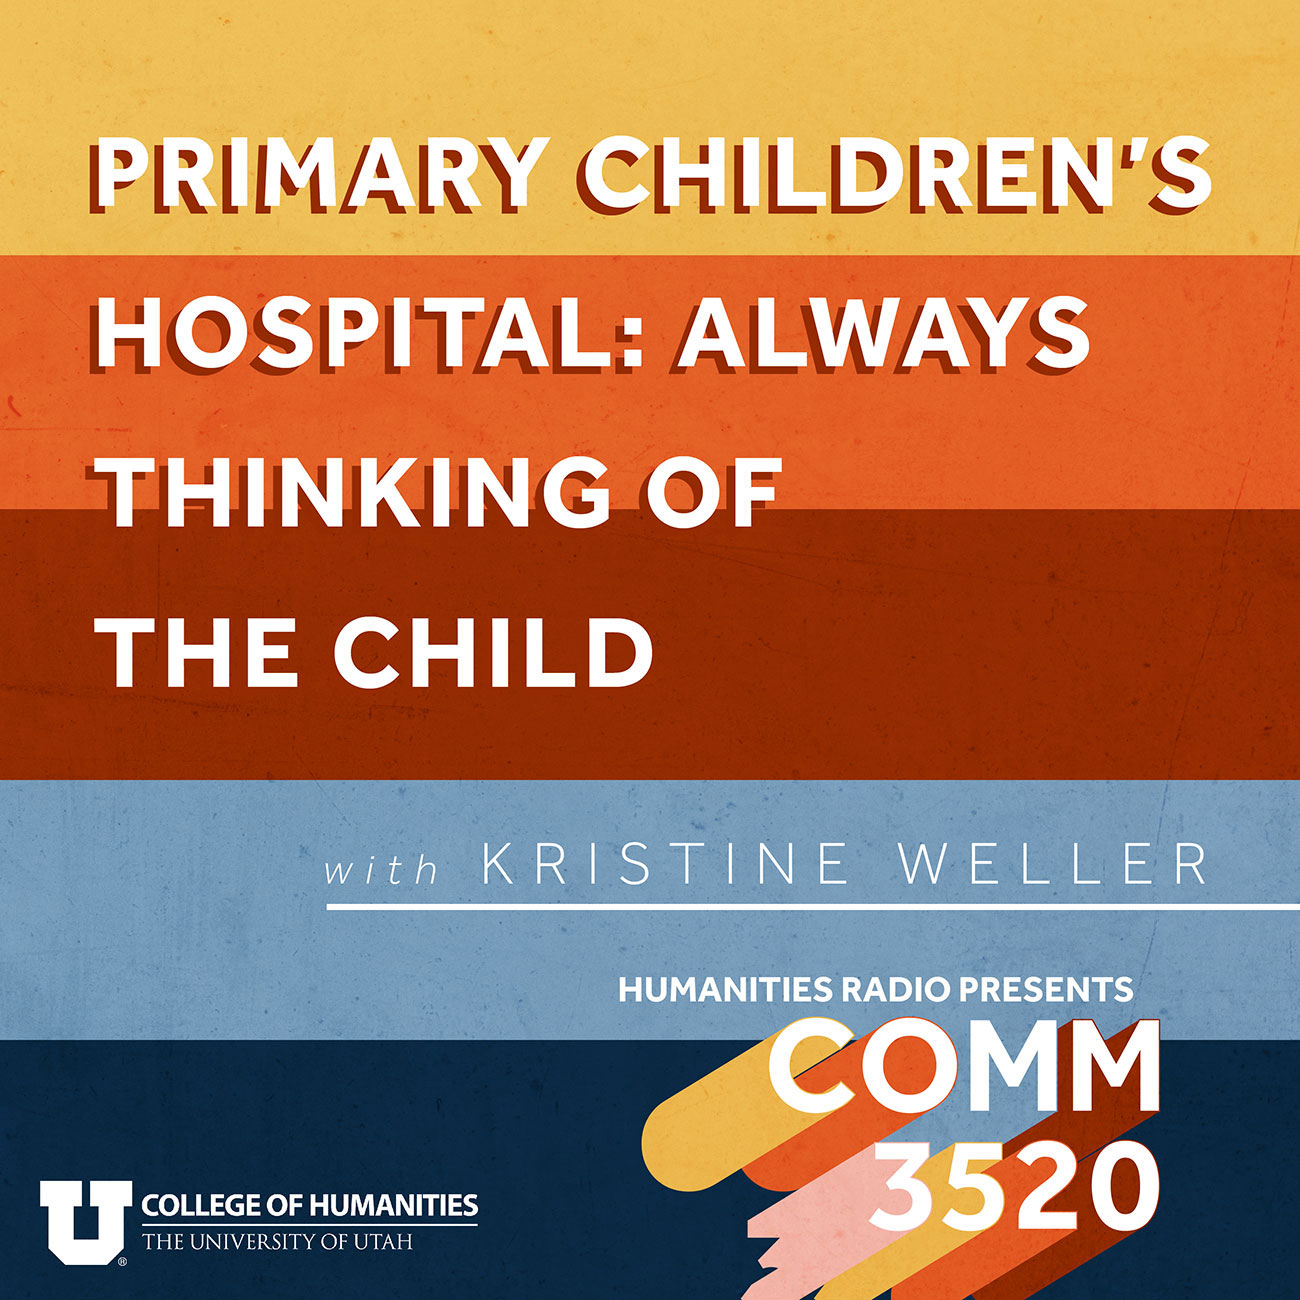 Primary Children’s Hospital: Always Thinking of the Child